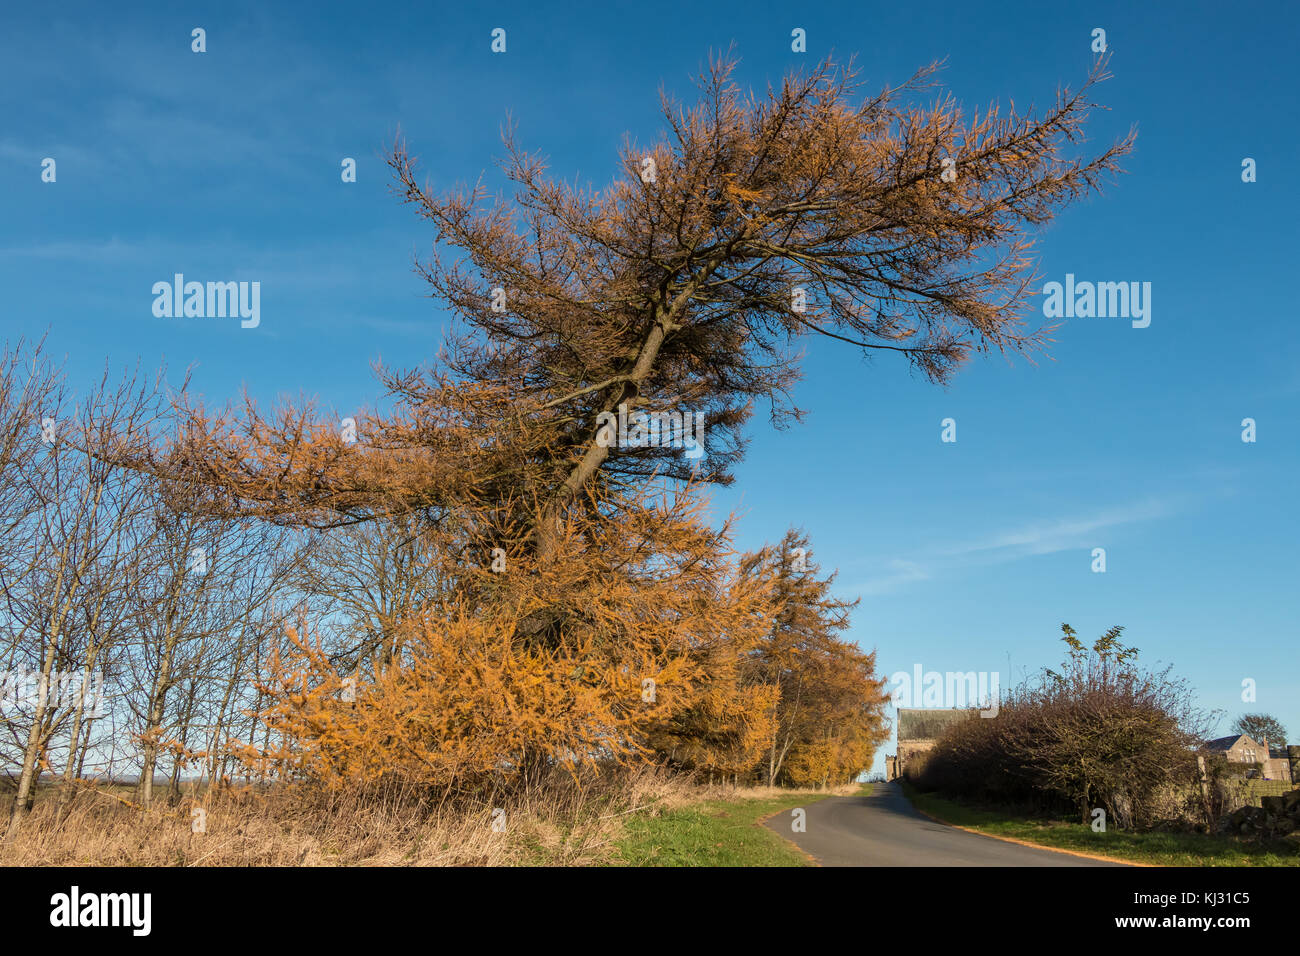 A row of European Larch trees in autumn gold colour against a clear blue sky, November 2017 with copy space Stock Photo